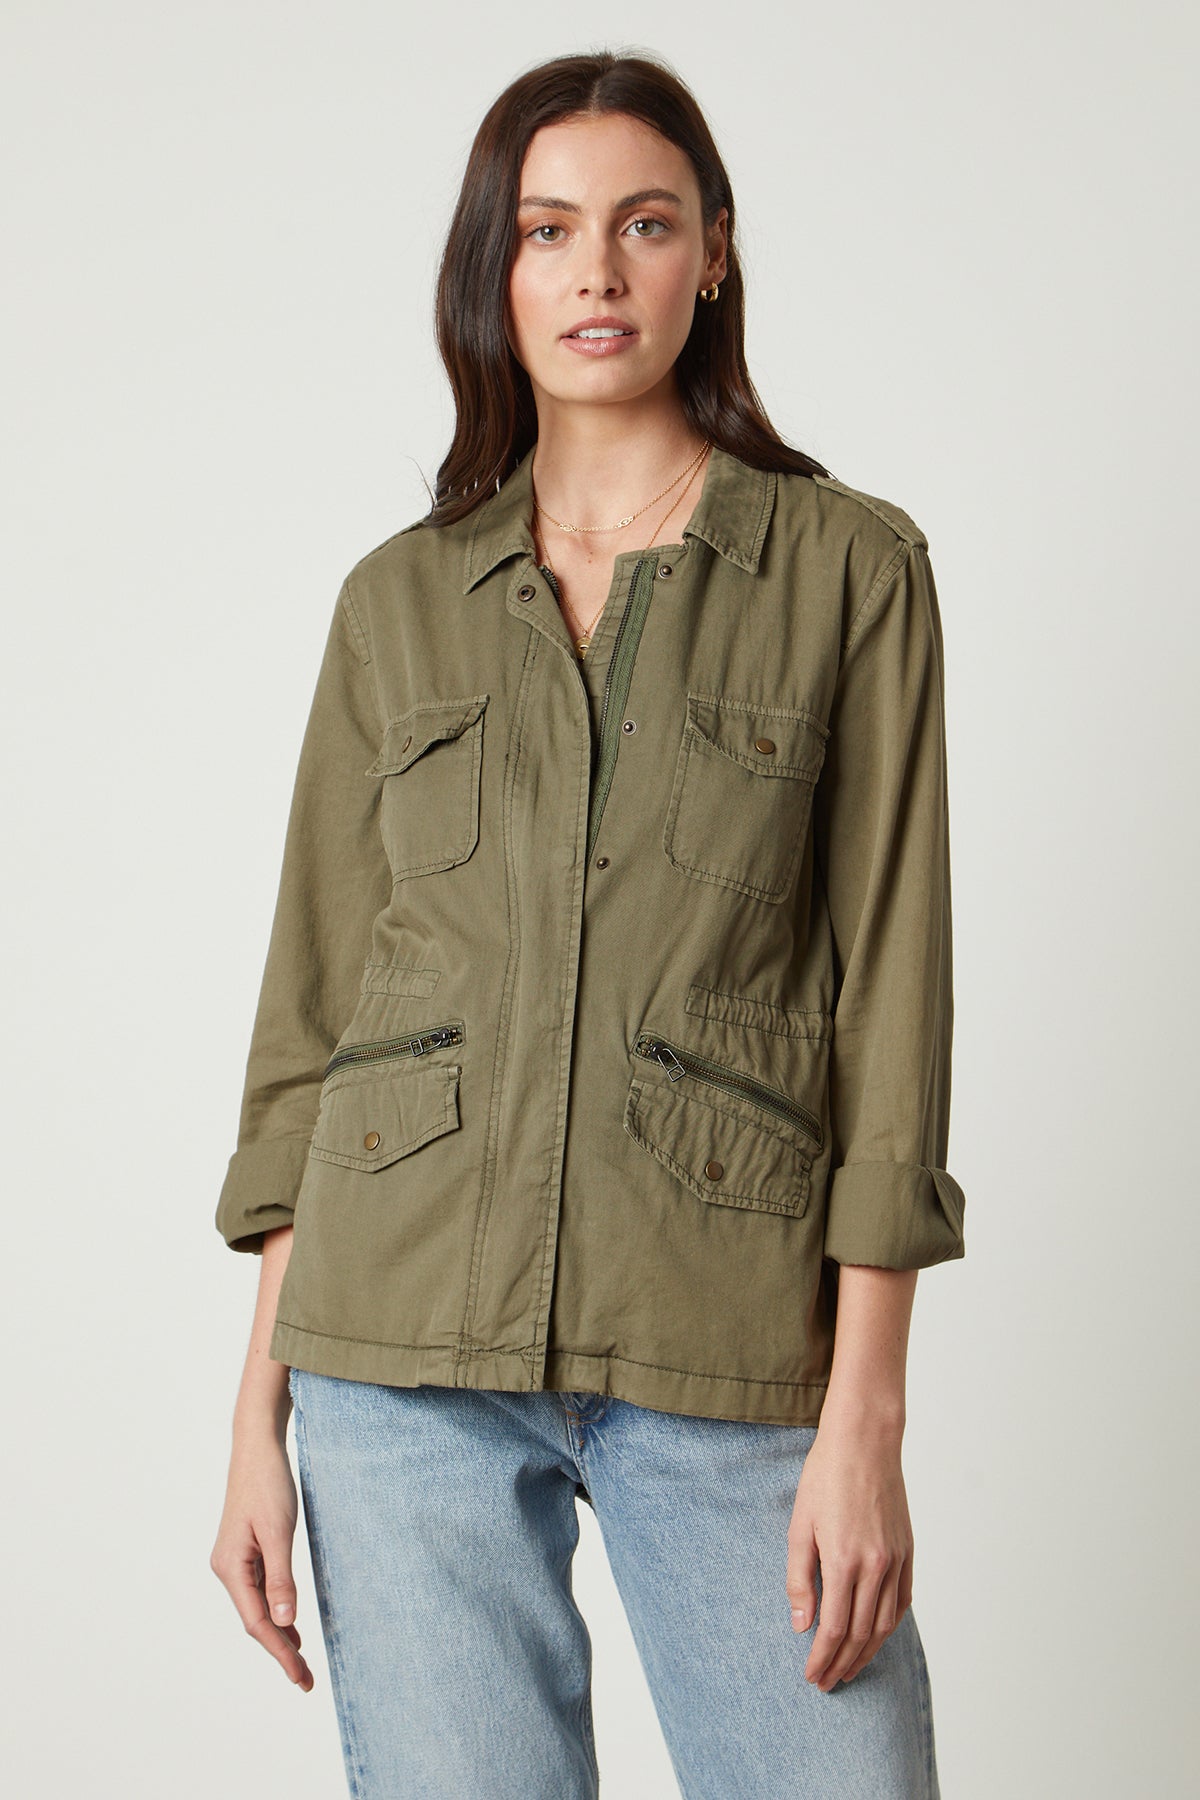 The RUBY LIGHT-WEIGHT ARMY JACKET in olive green, by Velvet by Graham & Spencer, exudes rock and roll glamour.-35207199260865